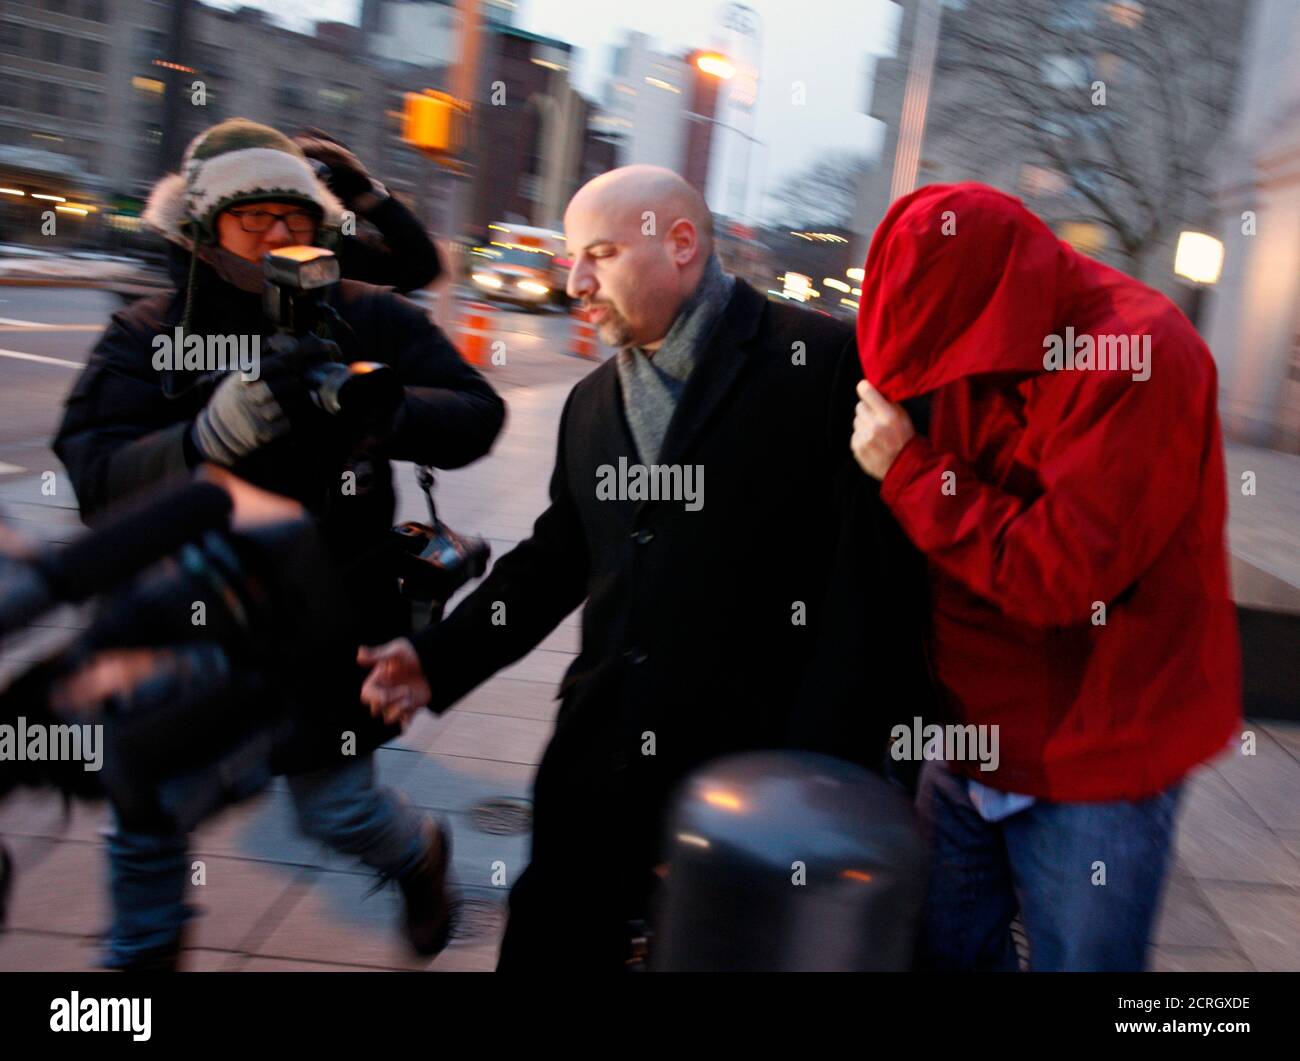 Former SAC Capital Advisers employee Donald Longueuil covers his face as he is led by his lawyer from the Manhattan Federal Courthouse in New York February 8, 2011. Two people, including Longueuil, who once worked for billionaire trader Steven A. Cohen's SAC Capital Advisers were charged with insider trading, drawing the $12 billion hedge fund firm further into a high-profile investigation.    REUTERS/Brendan McDermid (UNITED STATES - Tags: CRIME LAW BUSINESS) Stock Photo